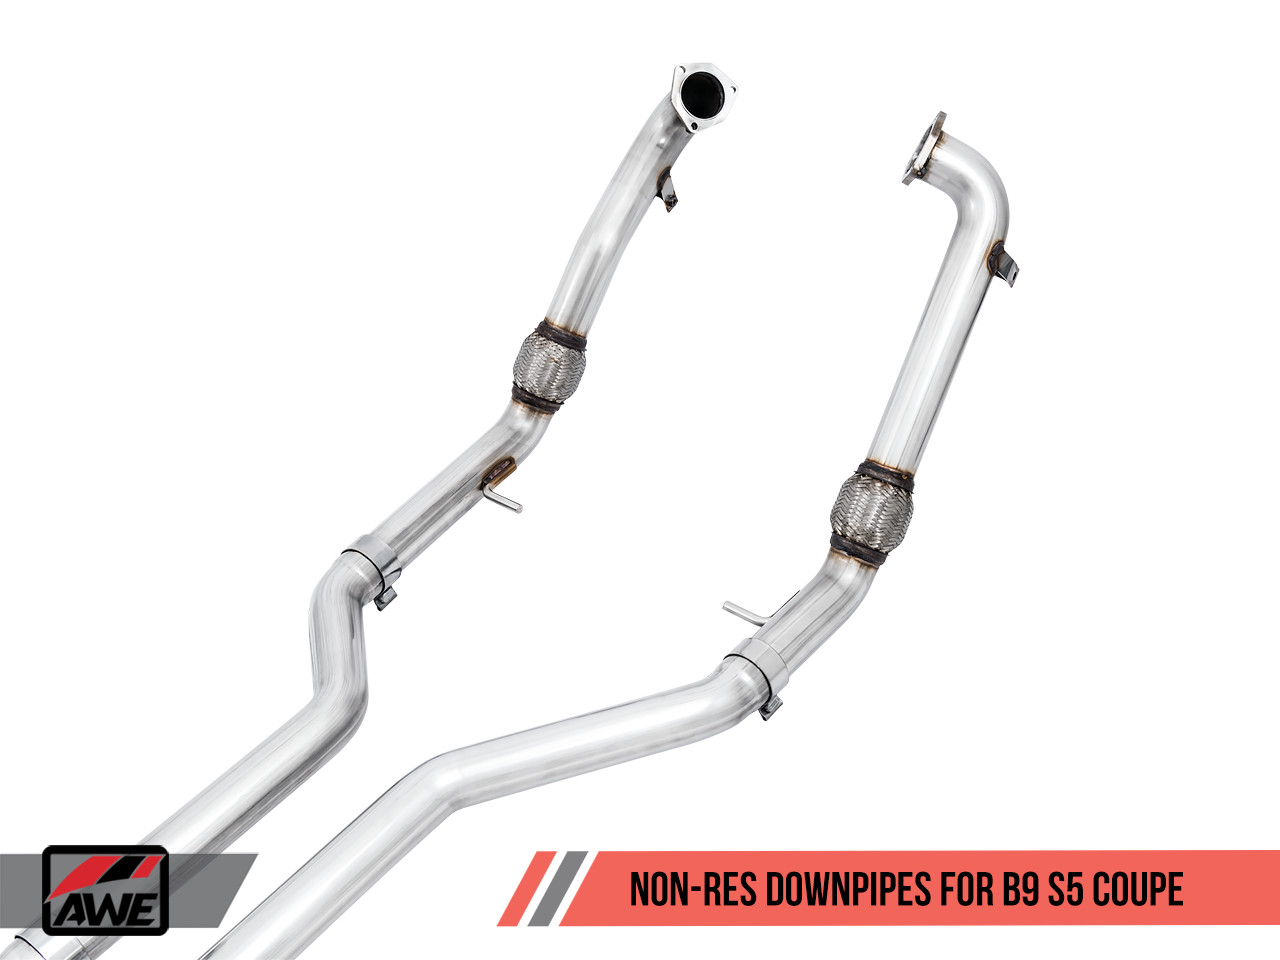 AWE Track Edition Exhaust for B9 S5 Coupe - Resonated for Performance Catalyst - Motorsports LA